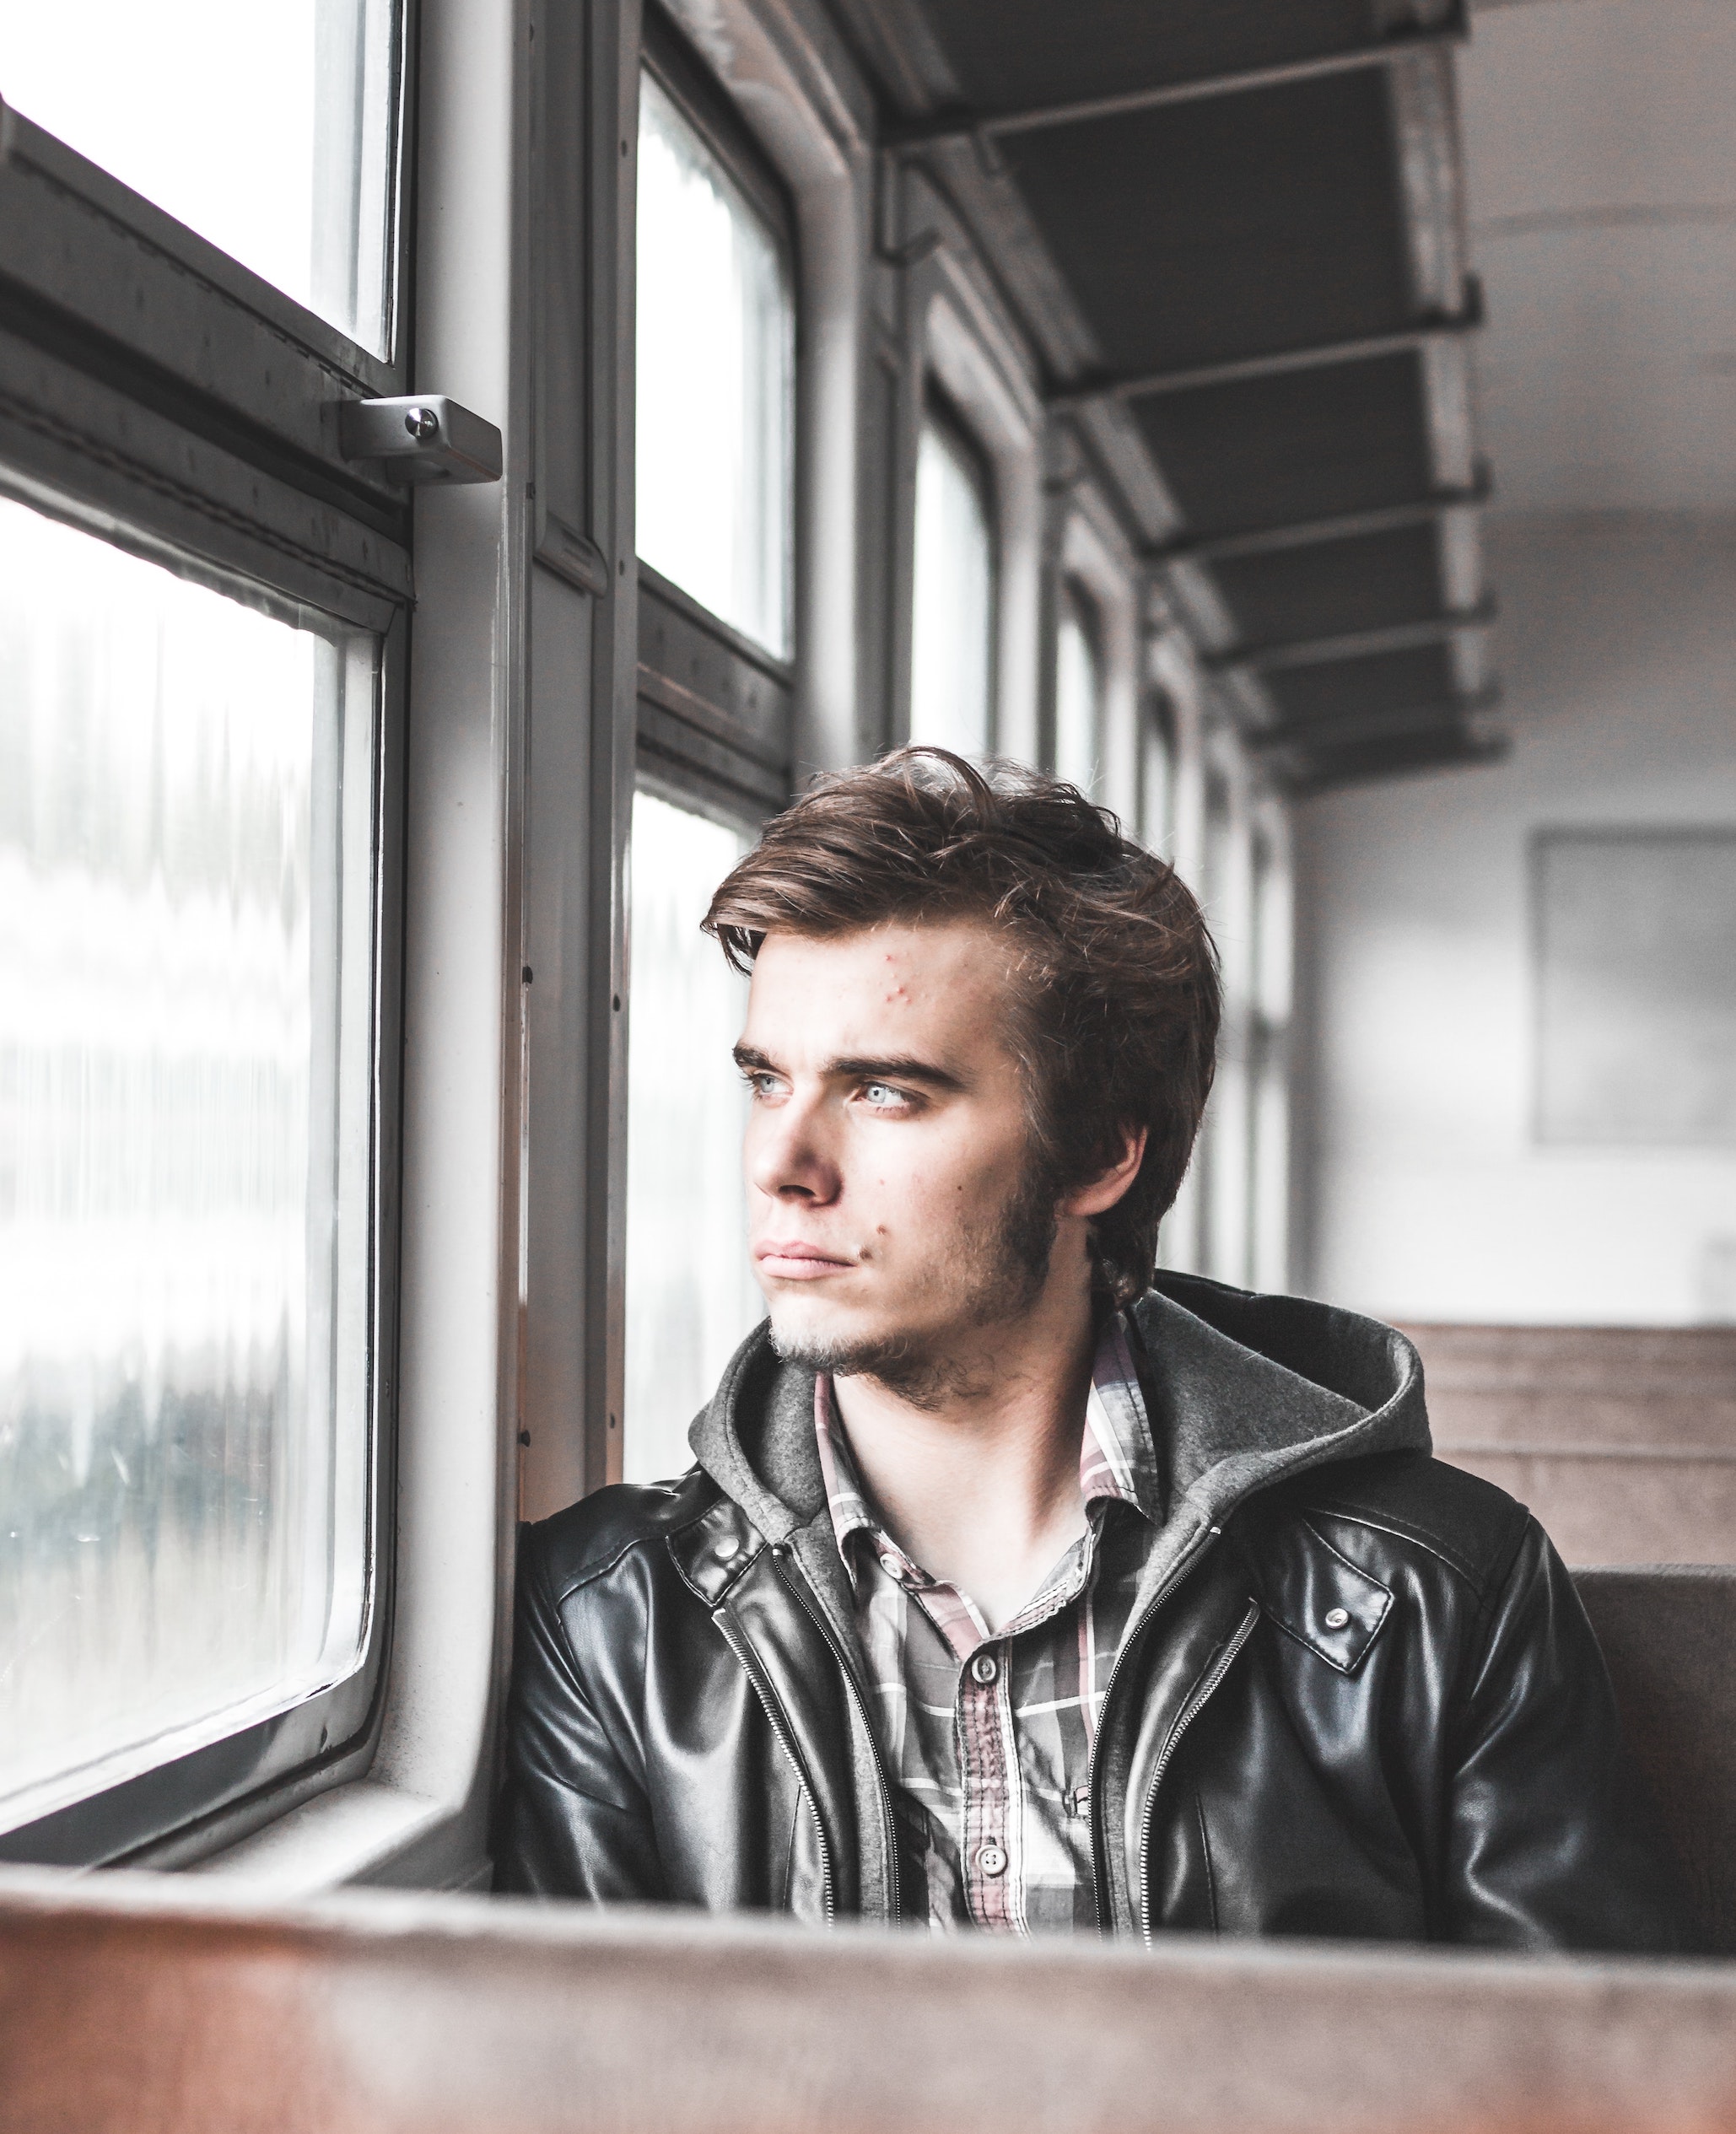 Man looking out bus window